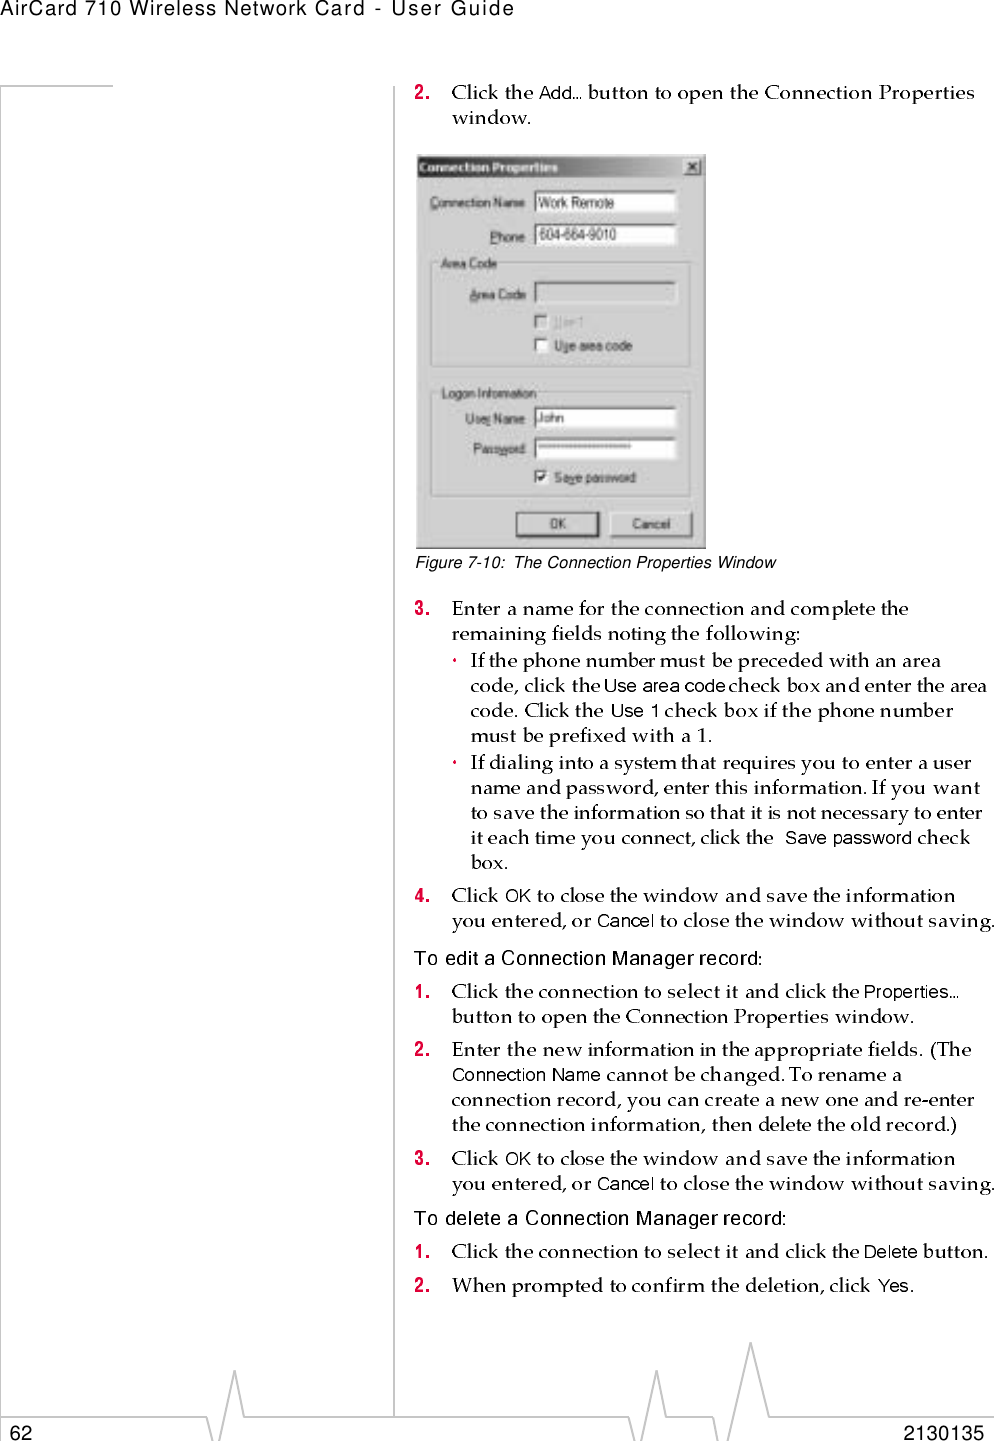 AirCard 710 Wireless Network Card - User Guide62 2130135Figure 7-10: The Connection Properties Window